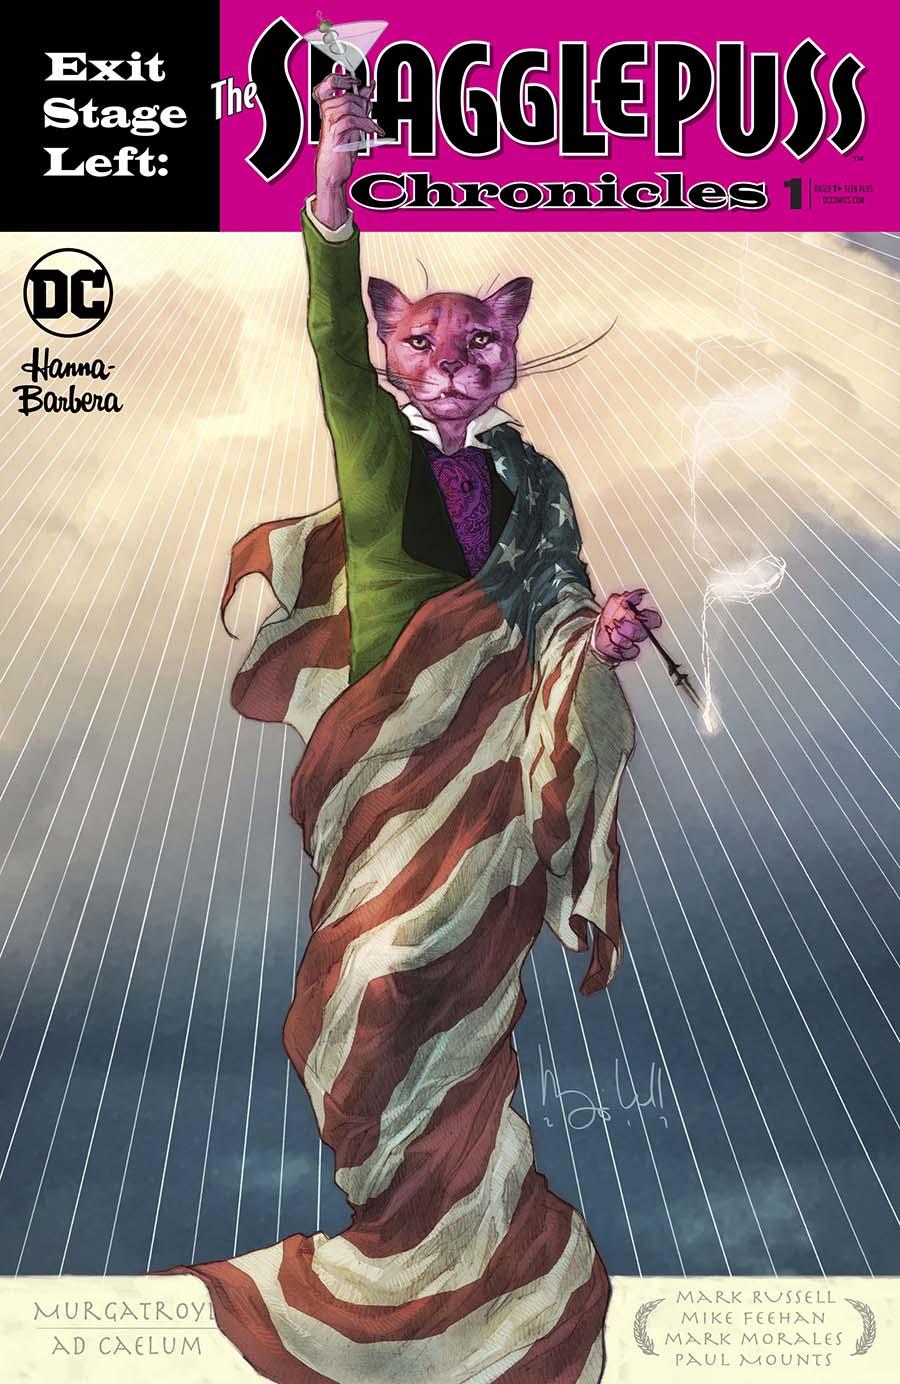 Exit Stage Left The Snagglepuss Chronicles Vol. 1 #1